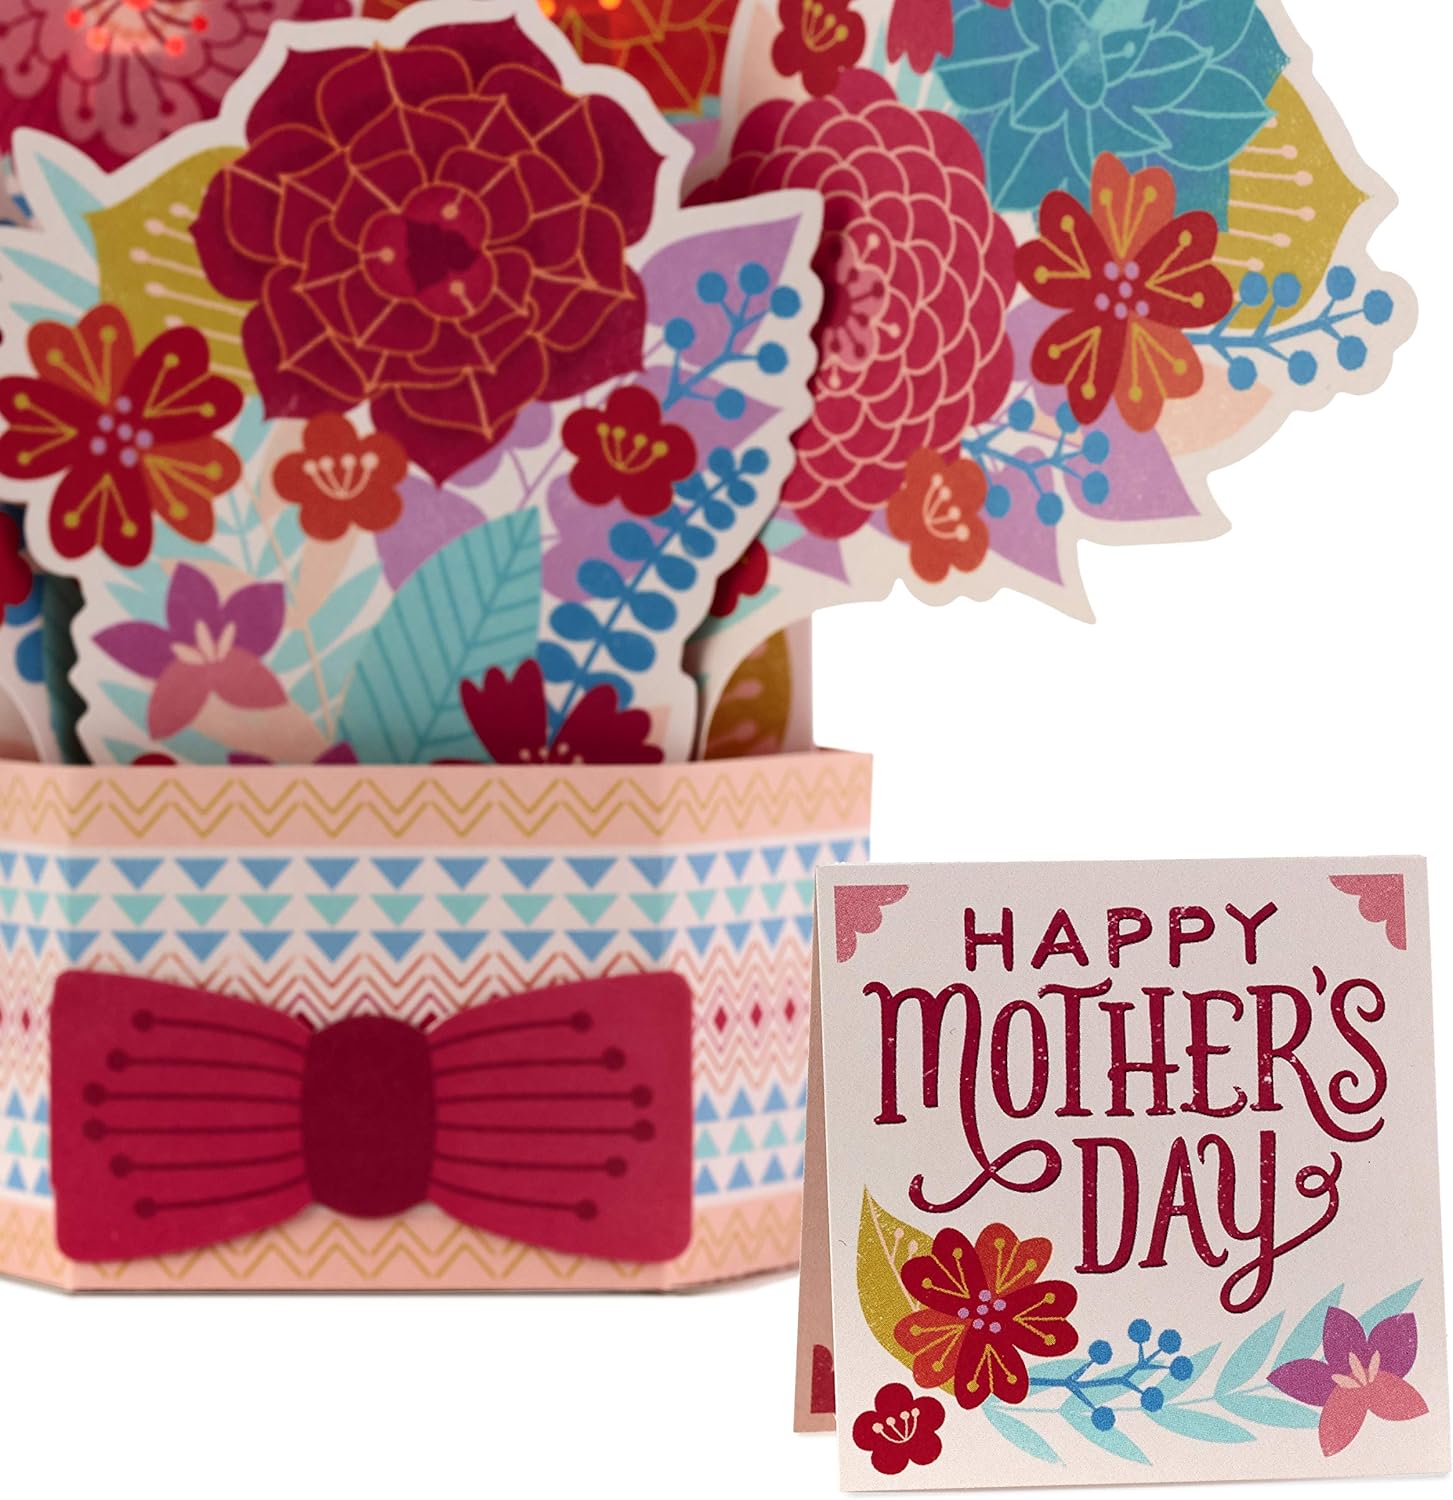 Hallmark Pop Up Musical Mothers Day Card With Light (Displayable Pot Of Flowers, Plays Happy By Pharrell Williams)